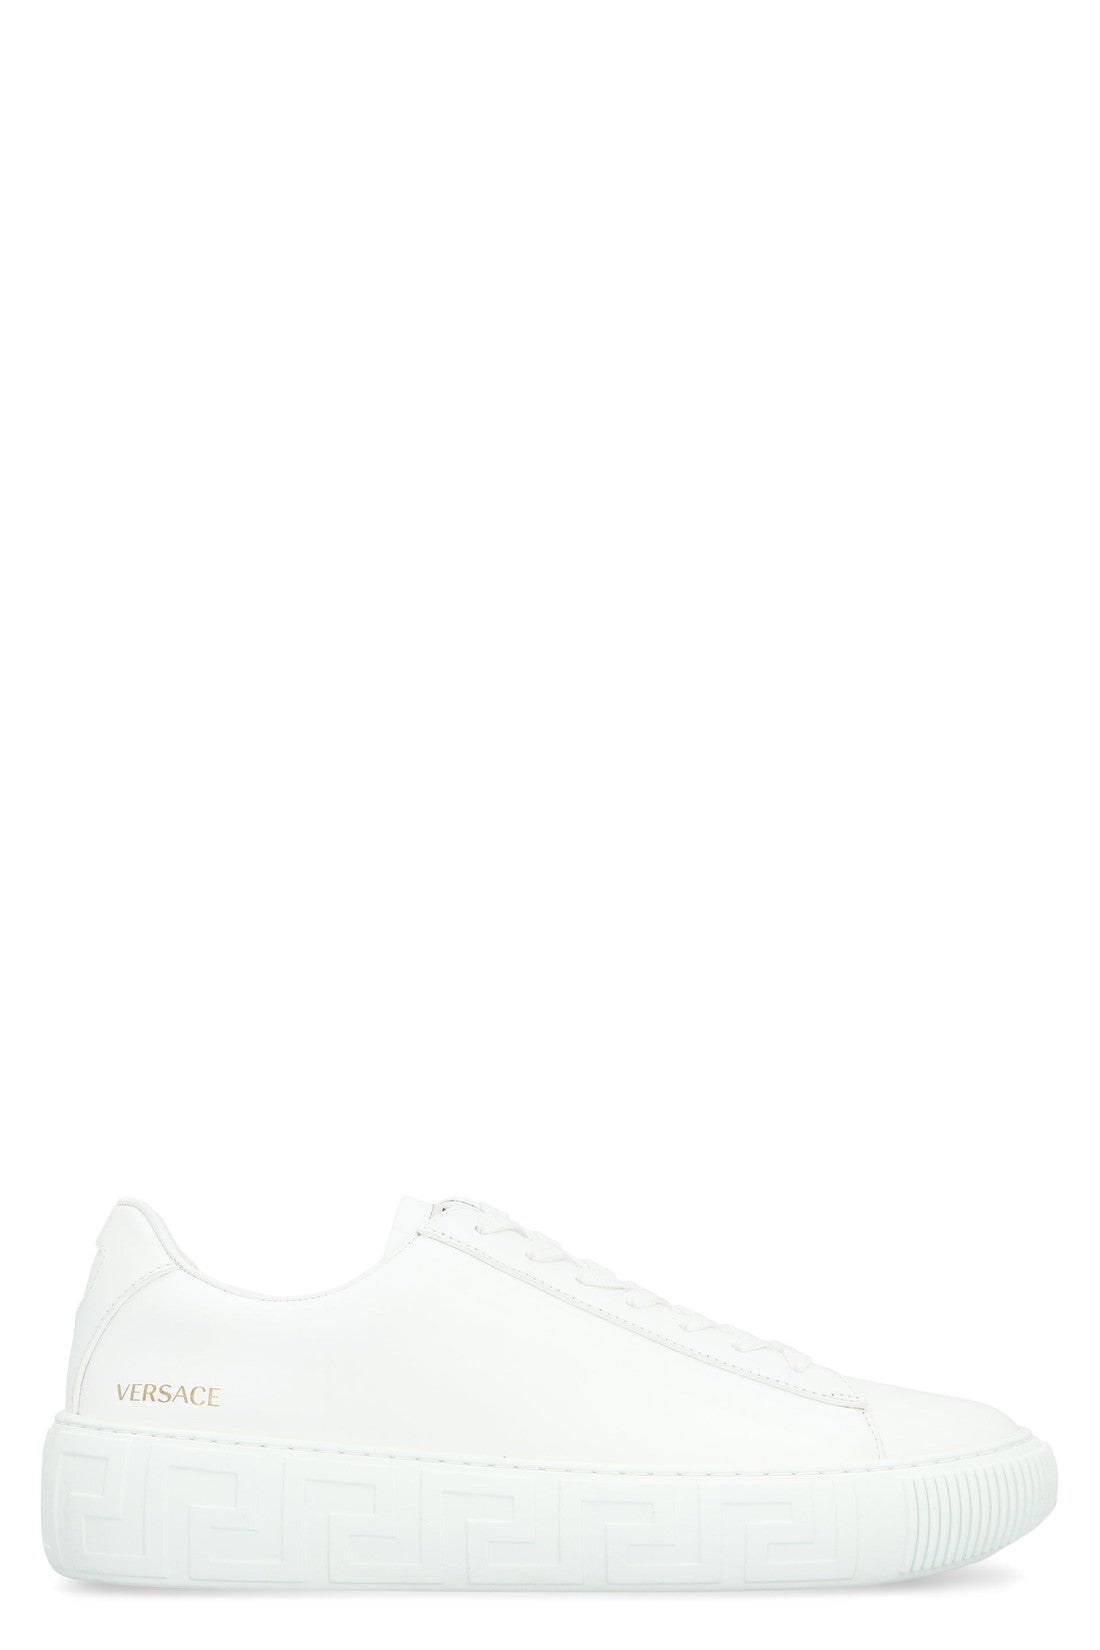 Versace-OUTLET-SALE-Greca Leather sneakers-ARCHIVIST